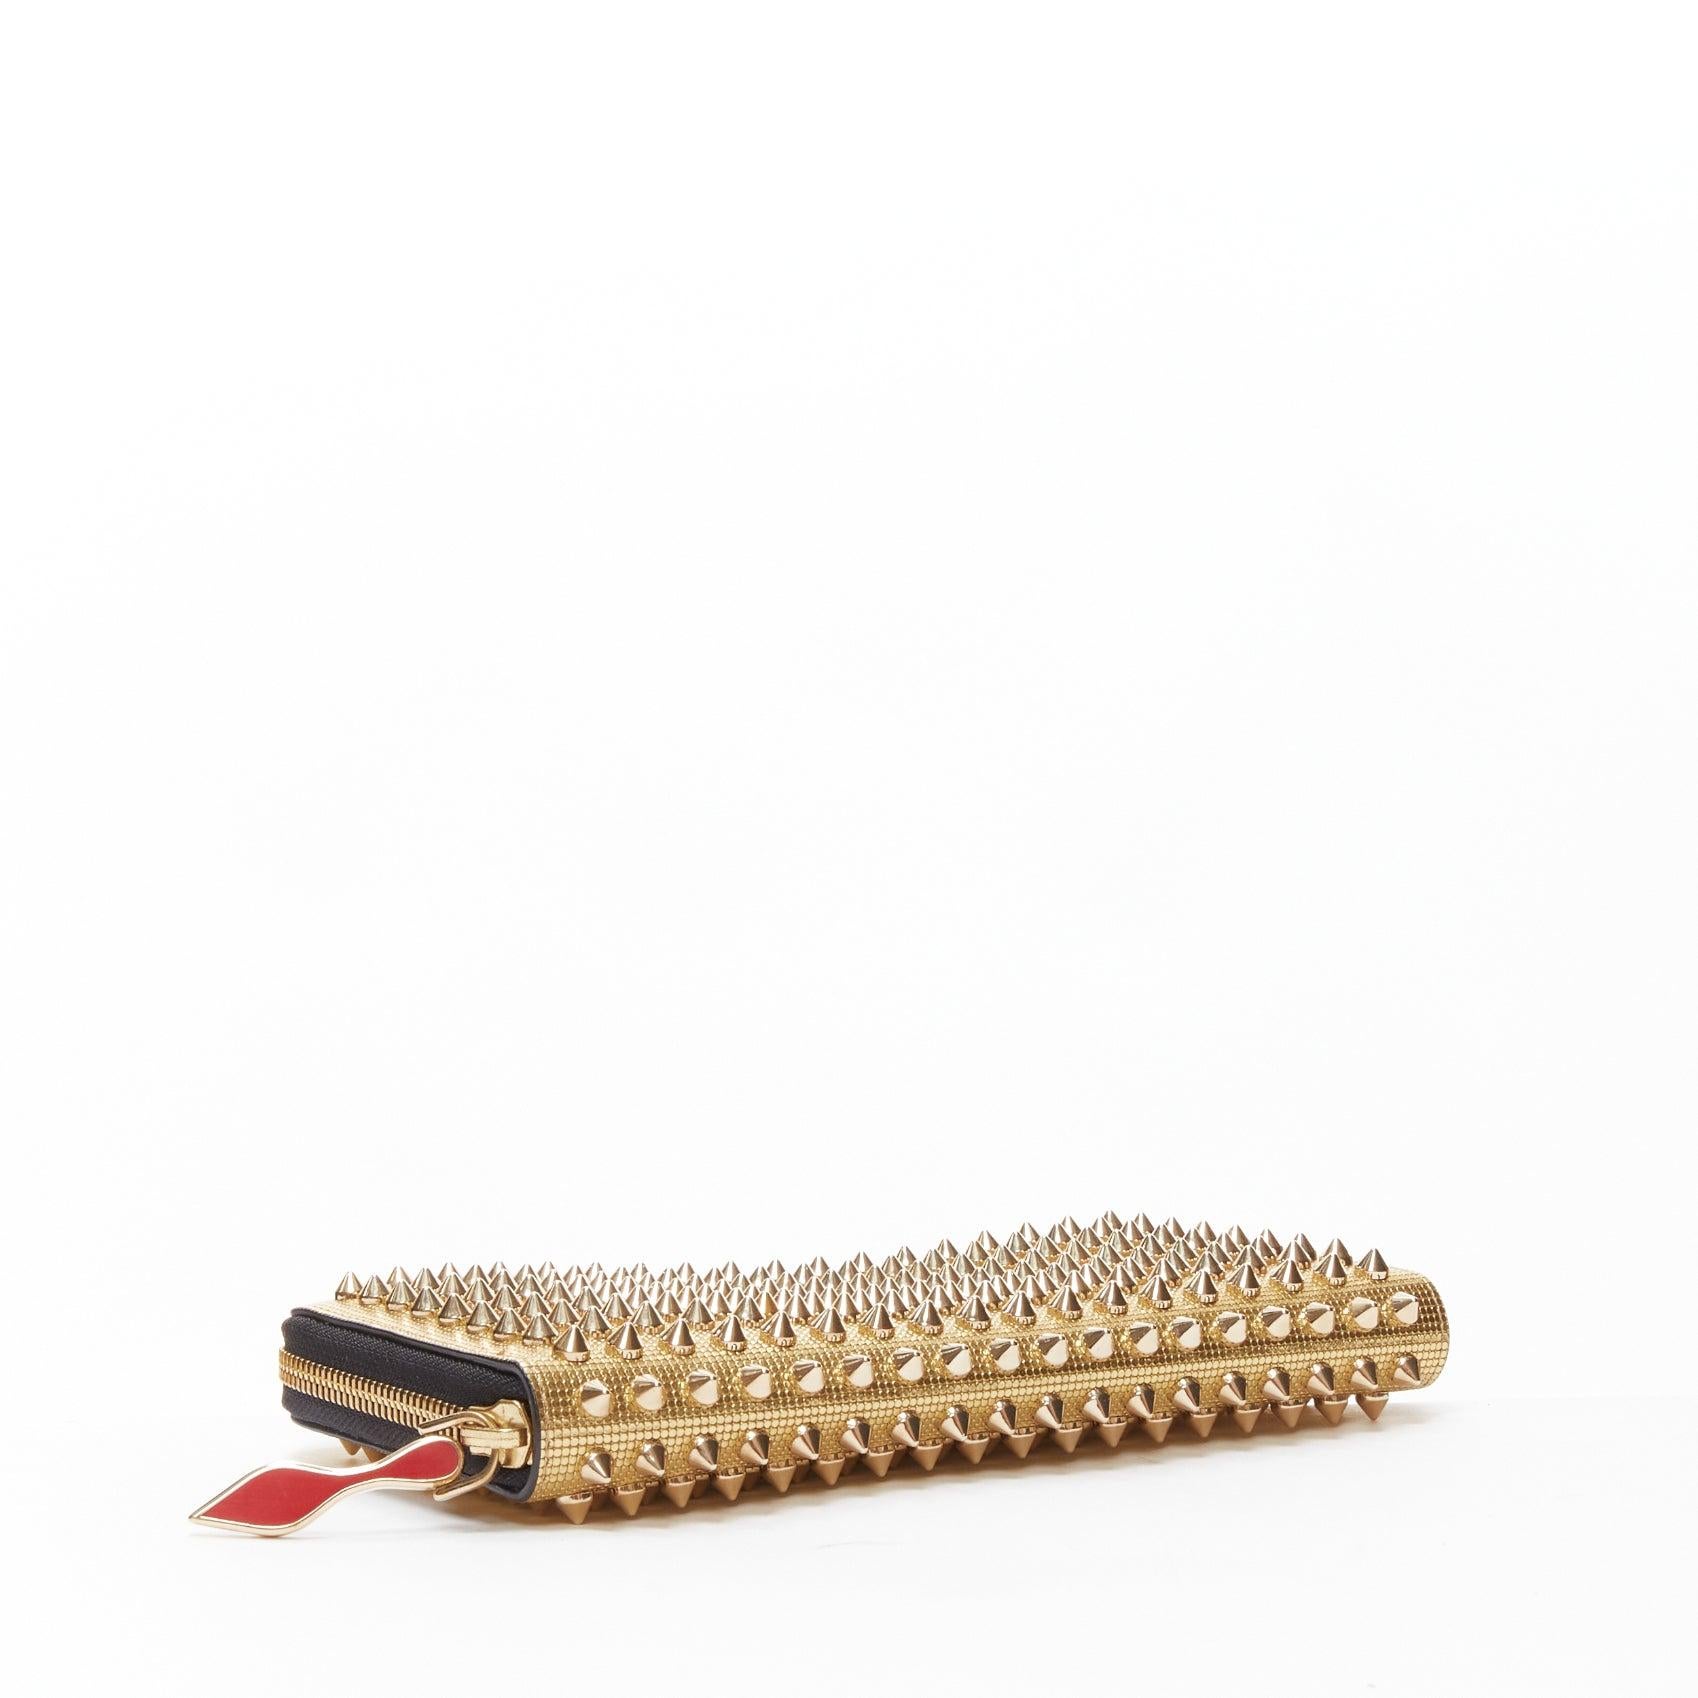 Women's CHRISTIAN LOUBOUTIN Panettone gold studded leather zip around long wallet For Sale